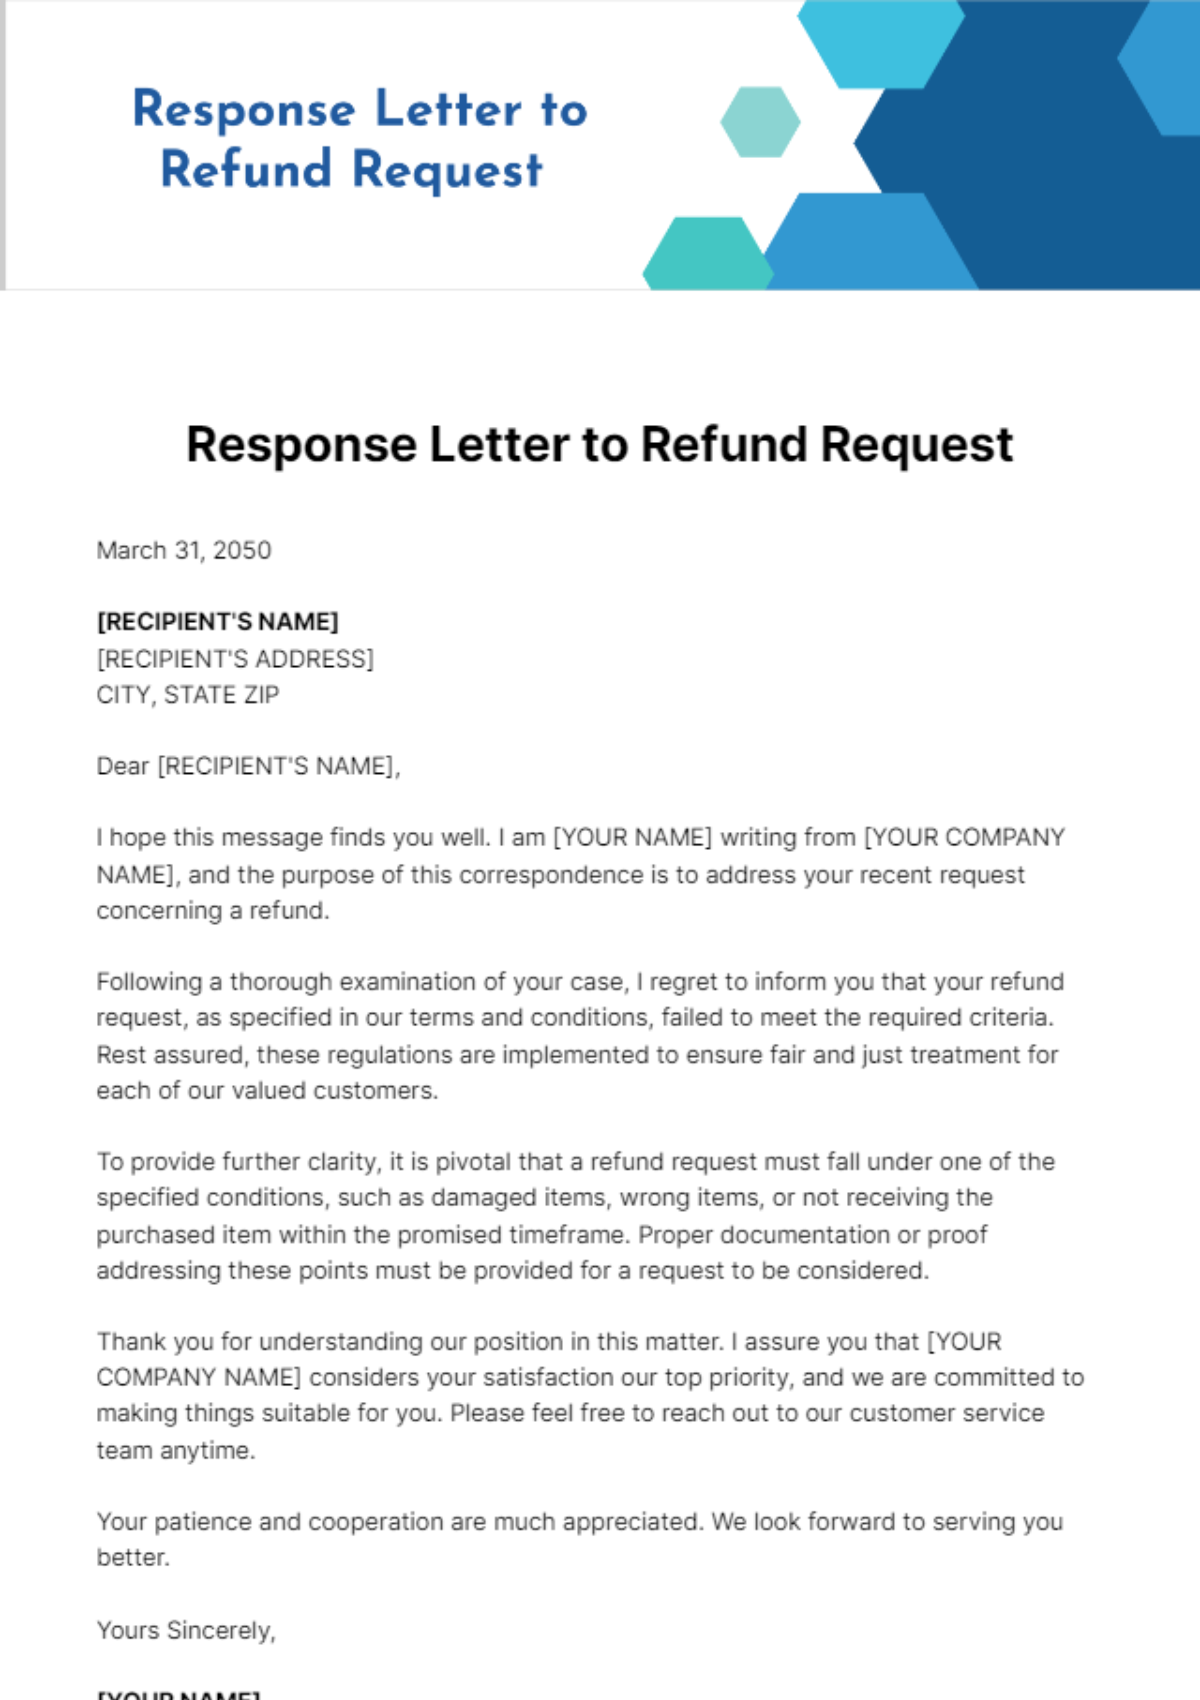 Free Response Letter to Refund Request Template